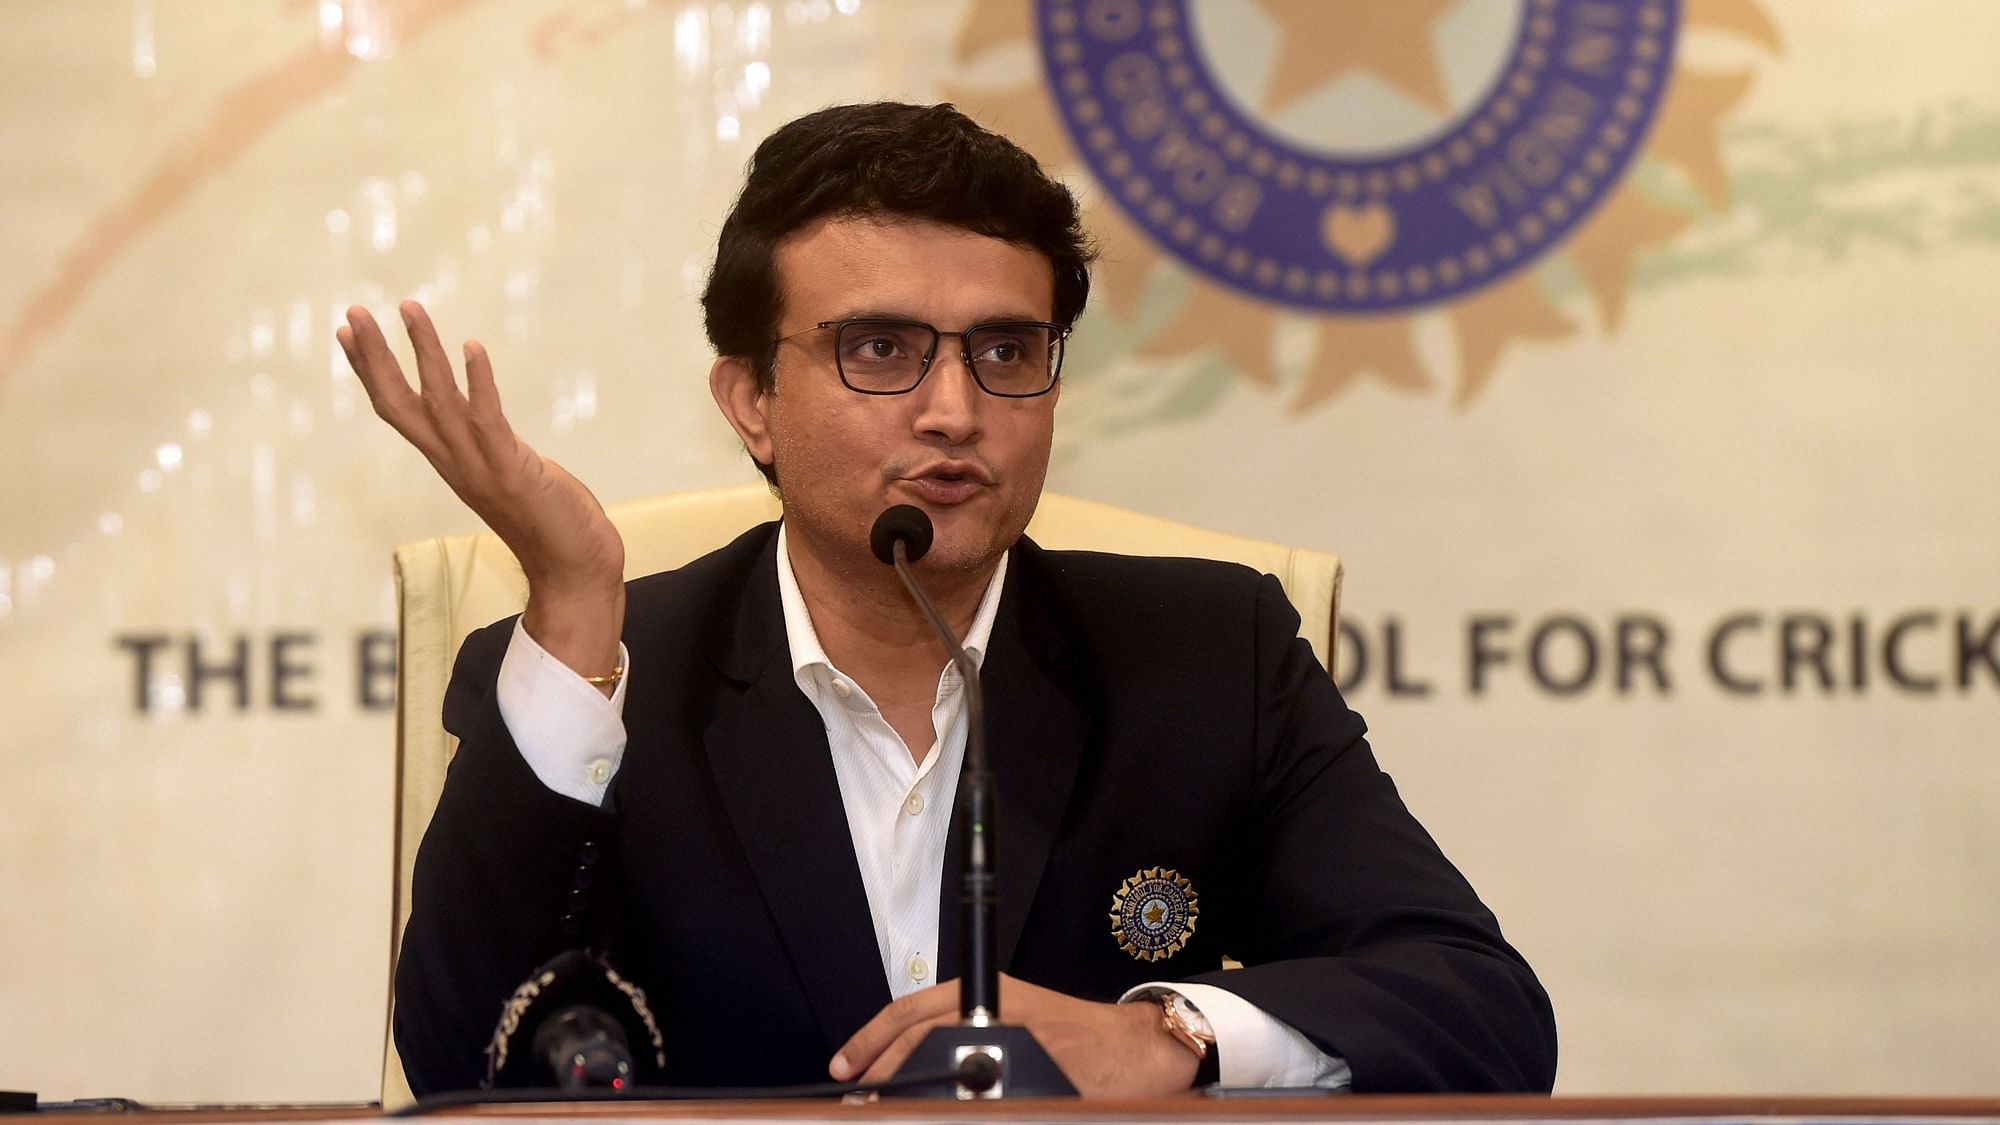 Sourav Ganguly came under fire for his decision to not move the match from Delhi despite the high pollution.&nbsp;